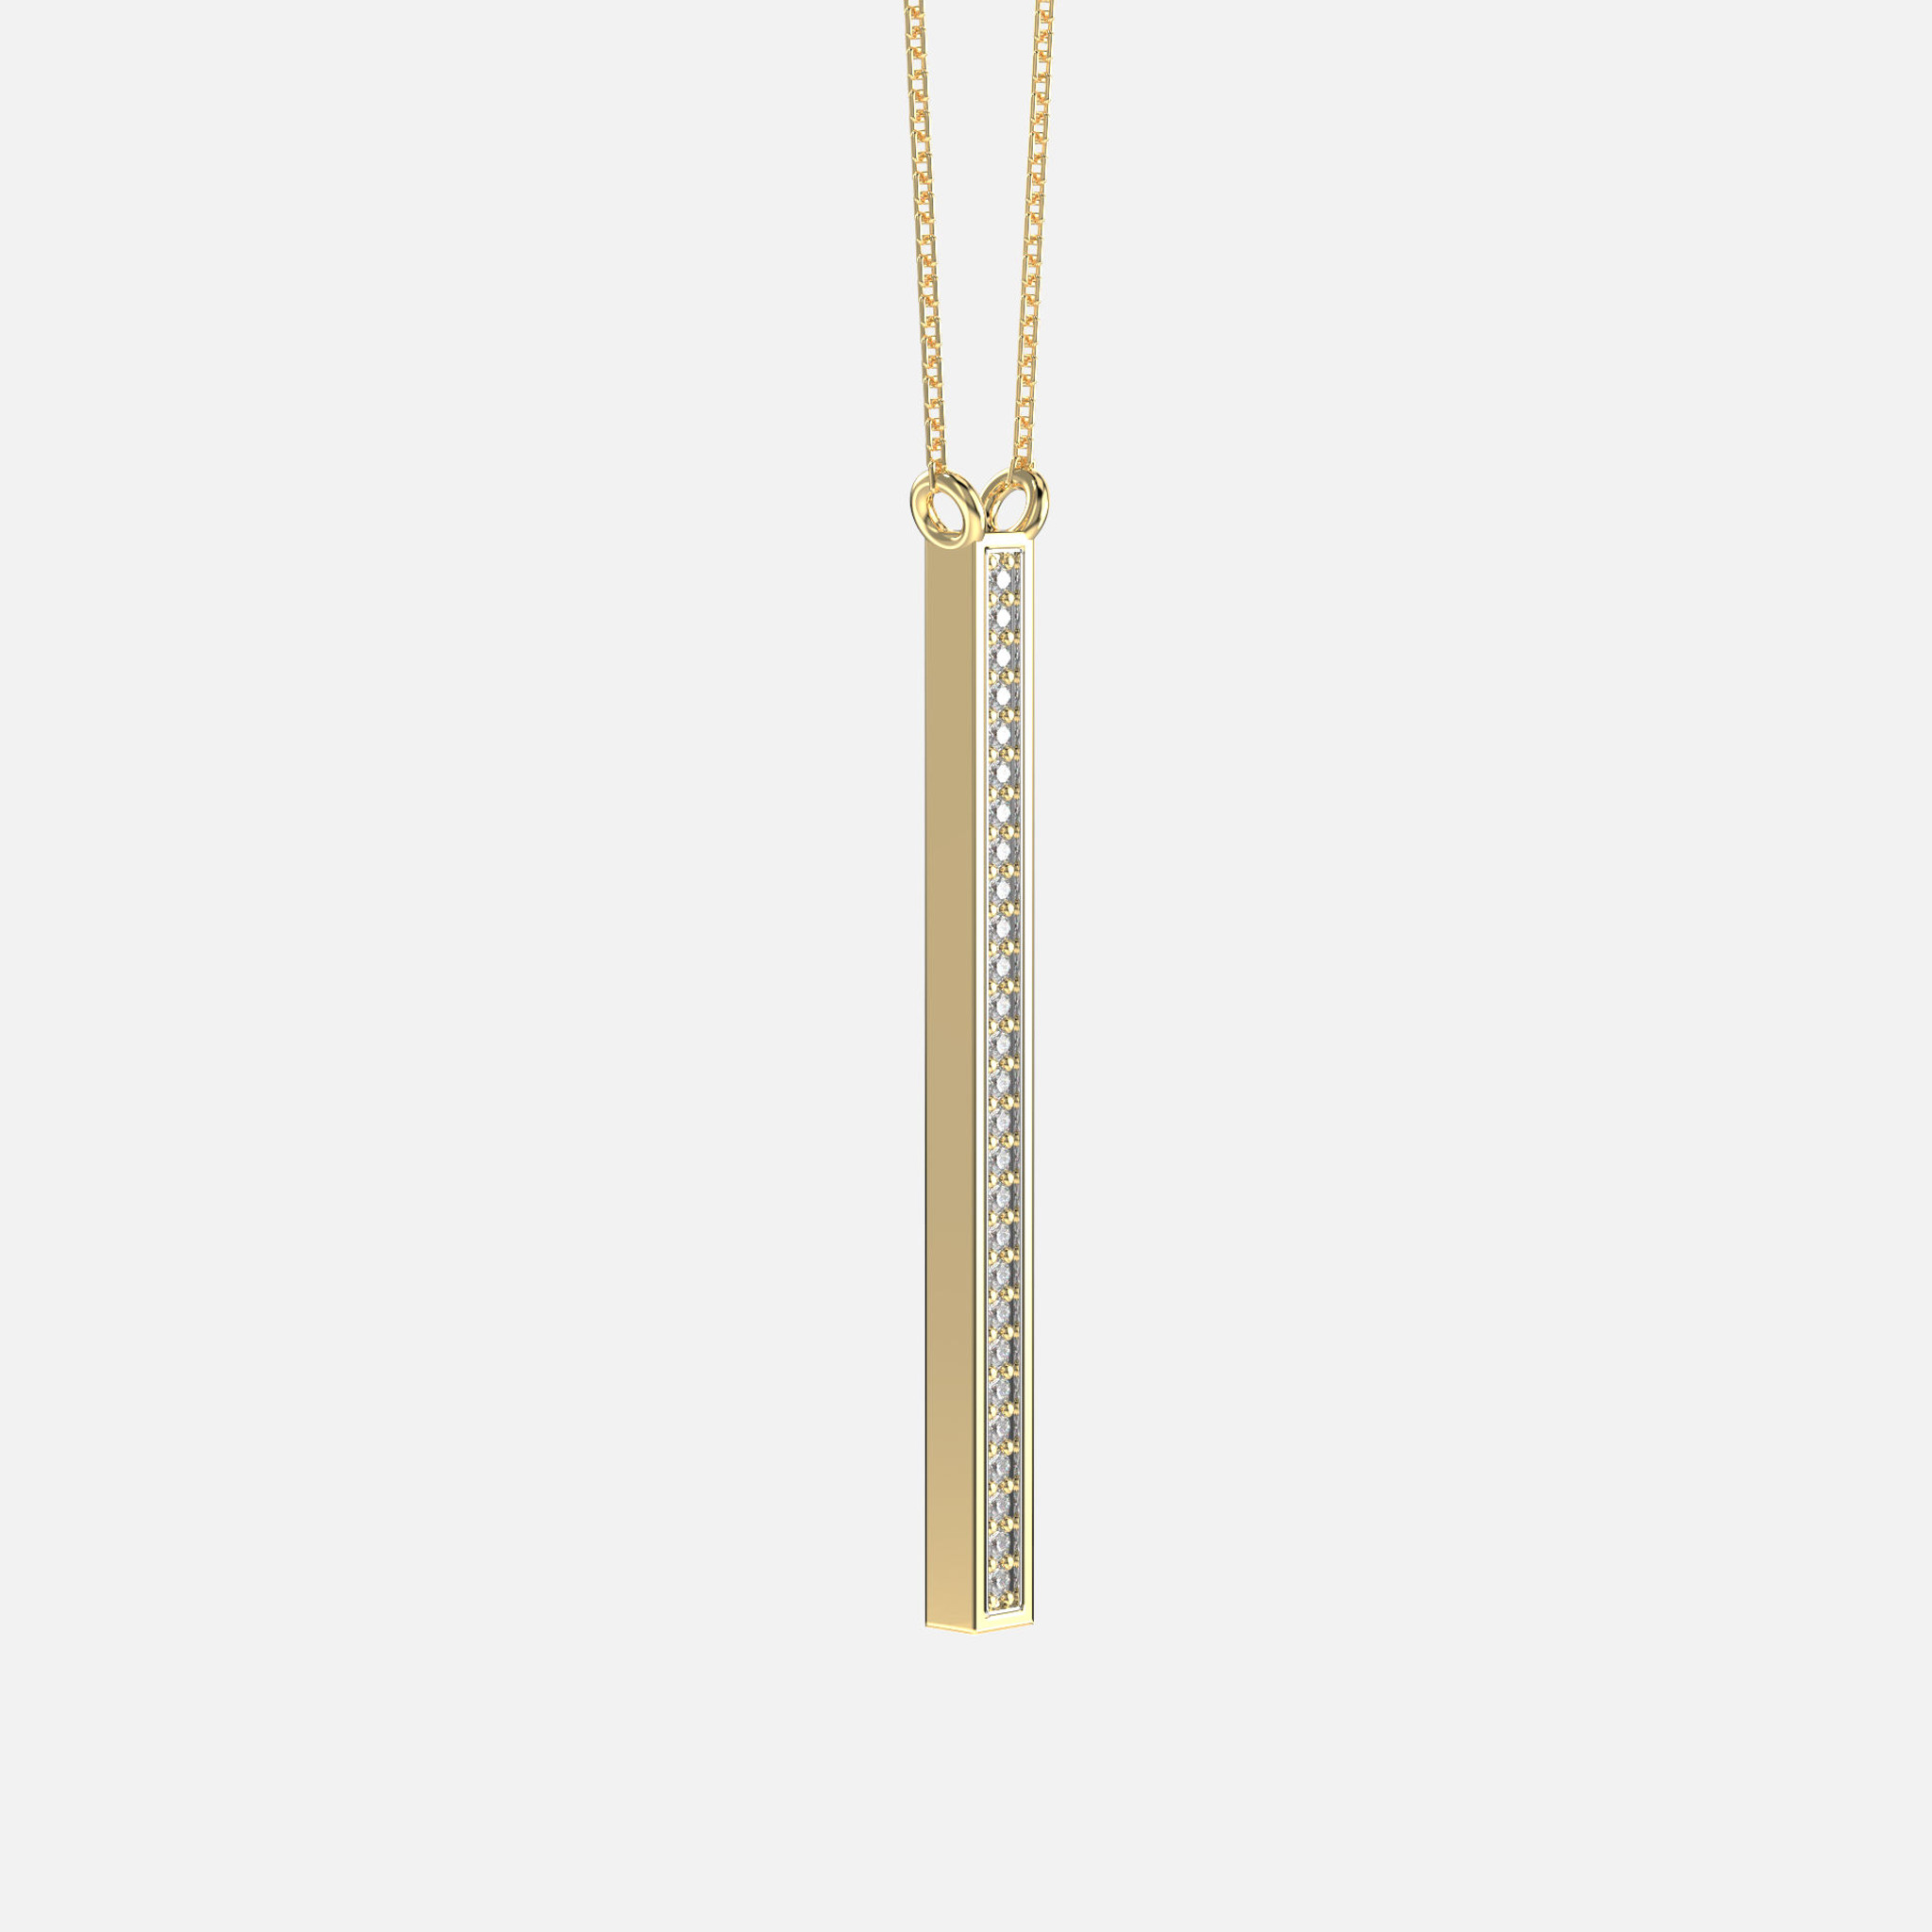 This drop bar necklace is crafted from 14k gold that's strung on a fine cable chain.